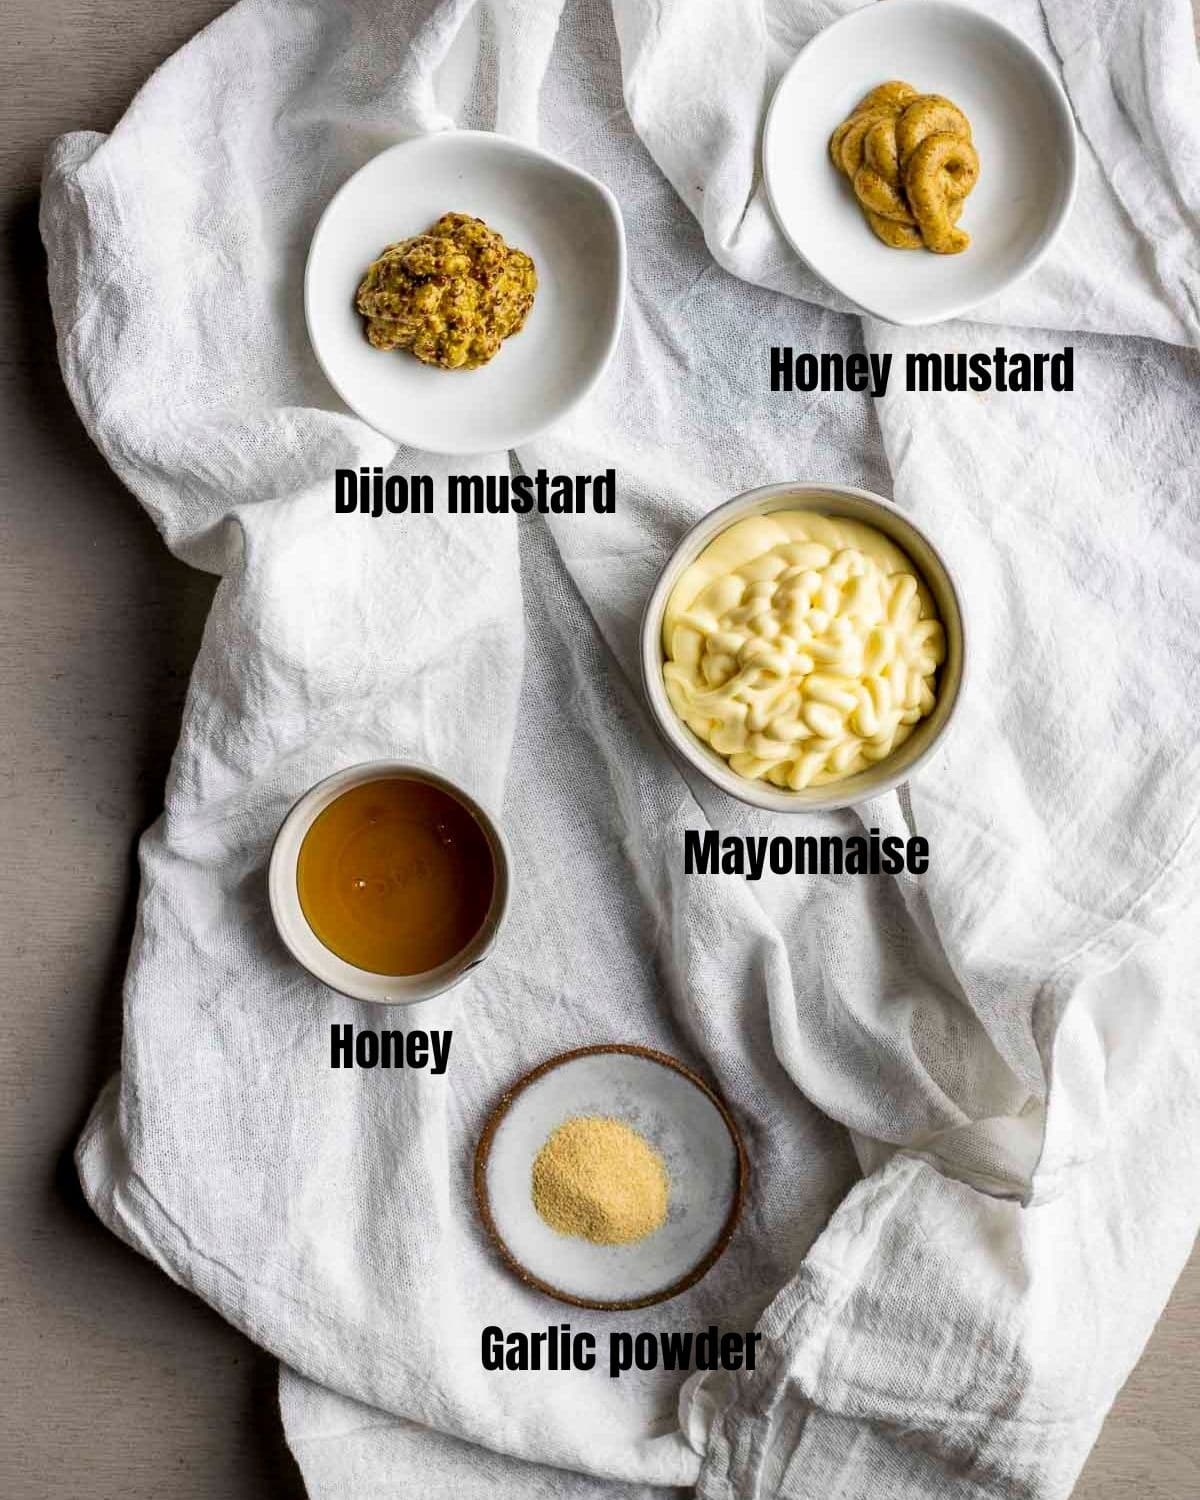 Ingredients to make creamy dijon sauce arranged individually and labelled.